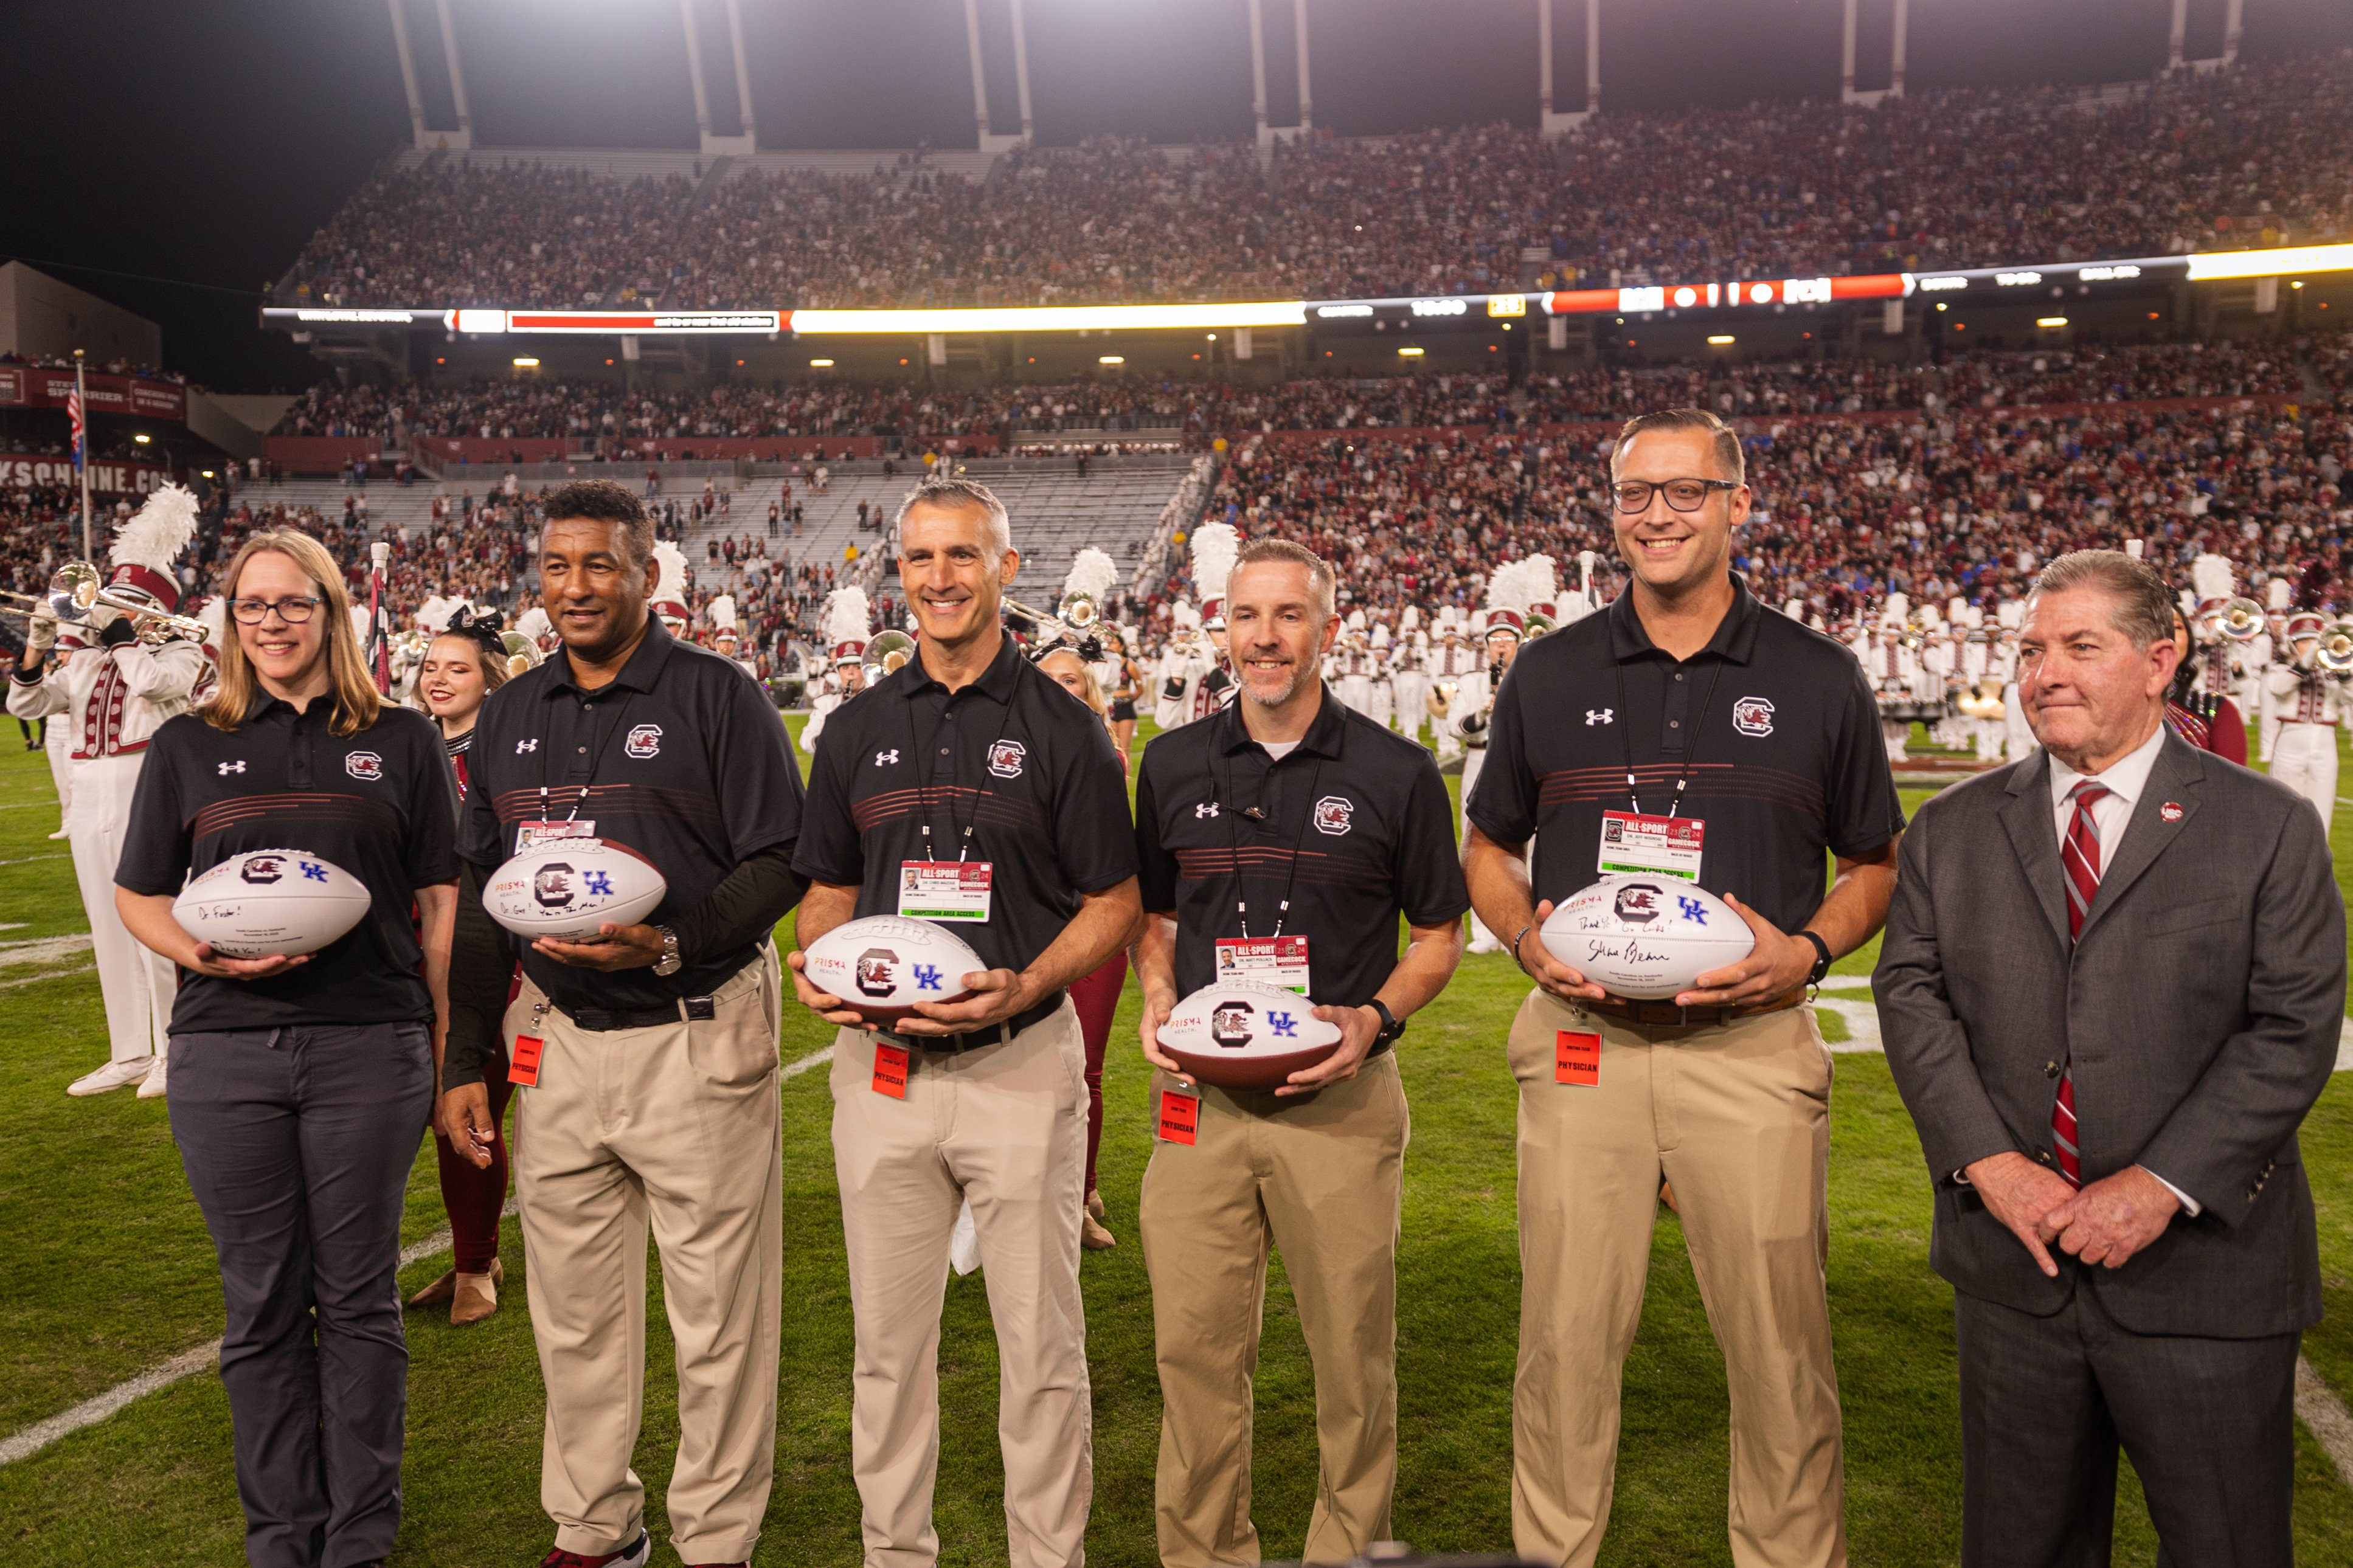 Prisma Health on X: Prisma Health was proud to be the presenting sponsor  of the USC football game against Kentucky on November 18! The recognition  included a game ball presentation and announcement